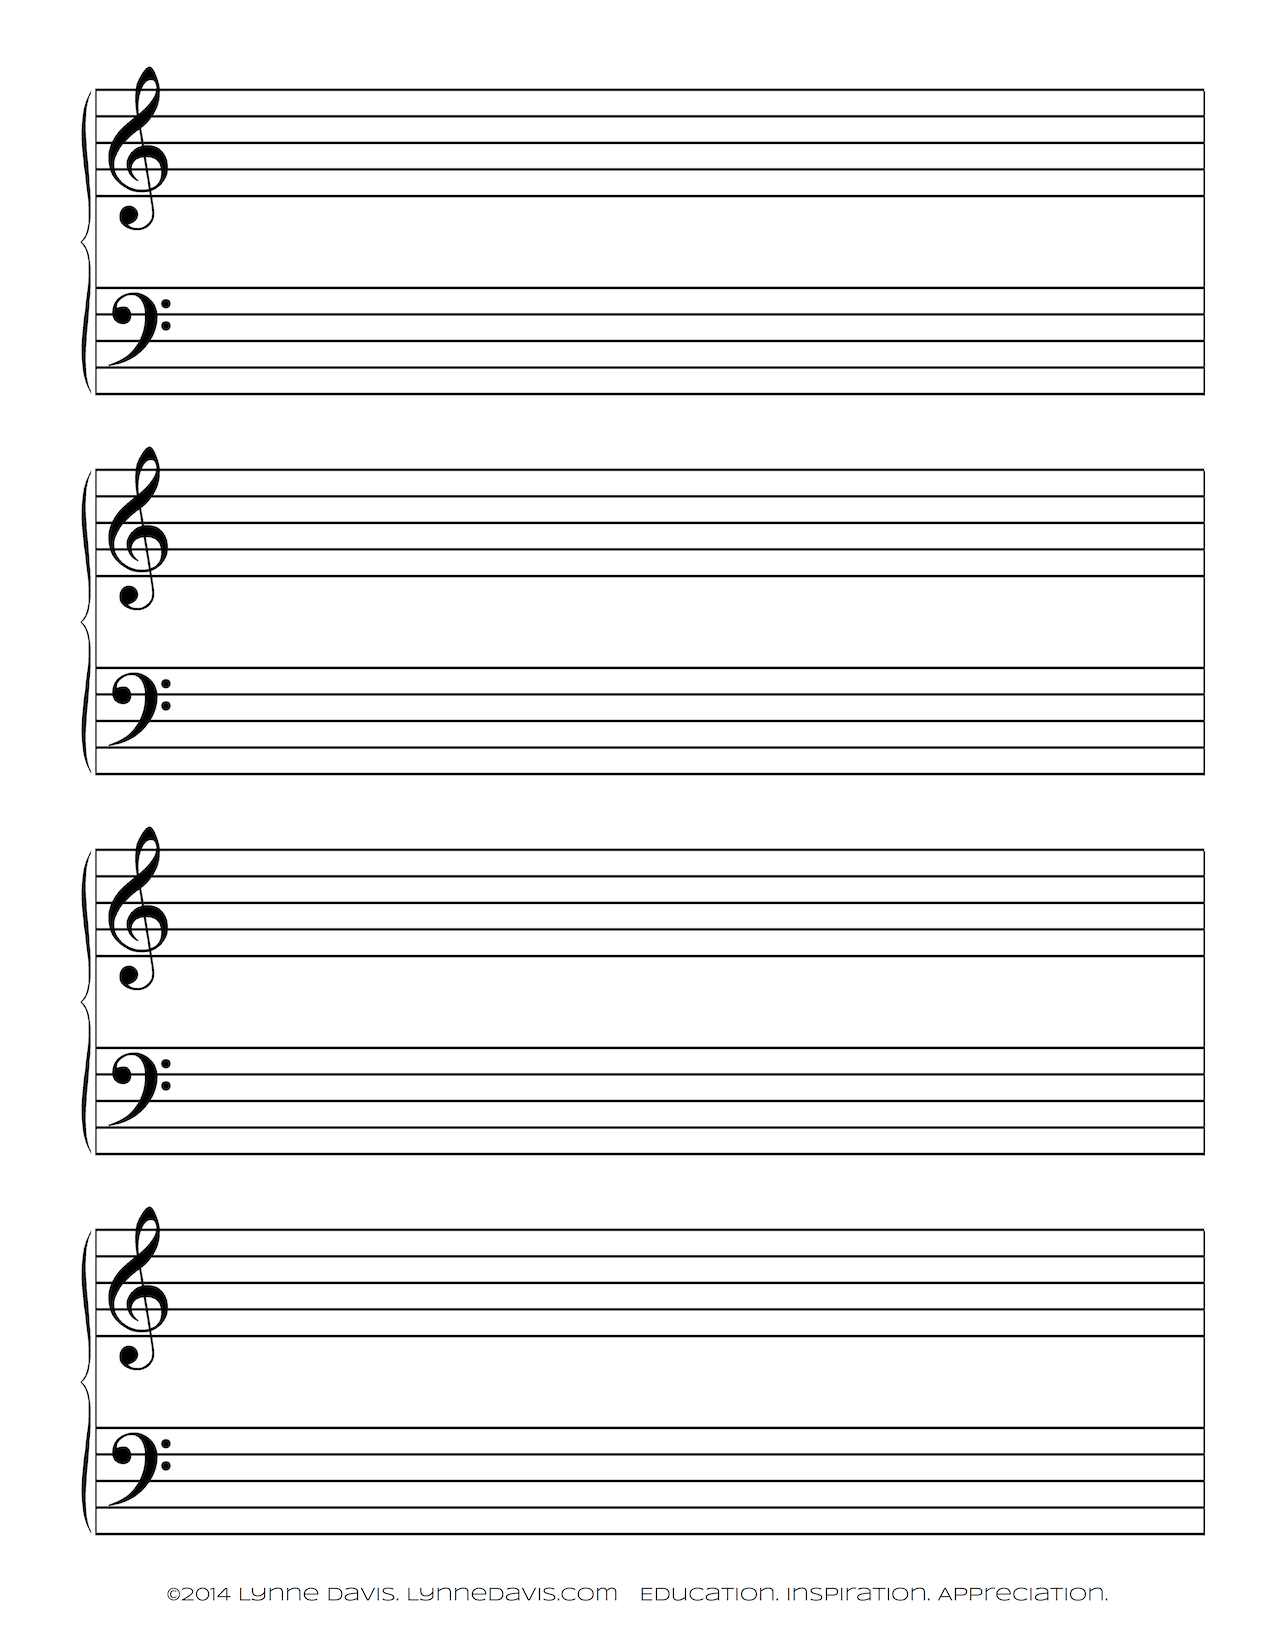 How to write your own music on sheet music